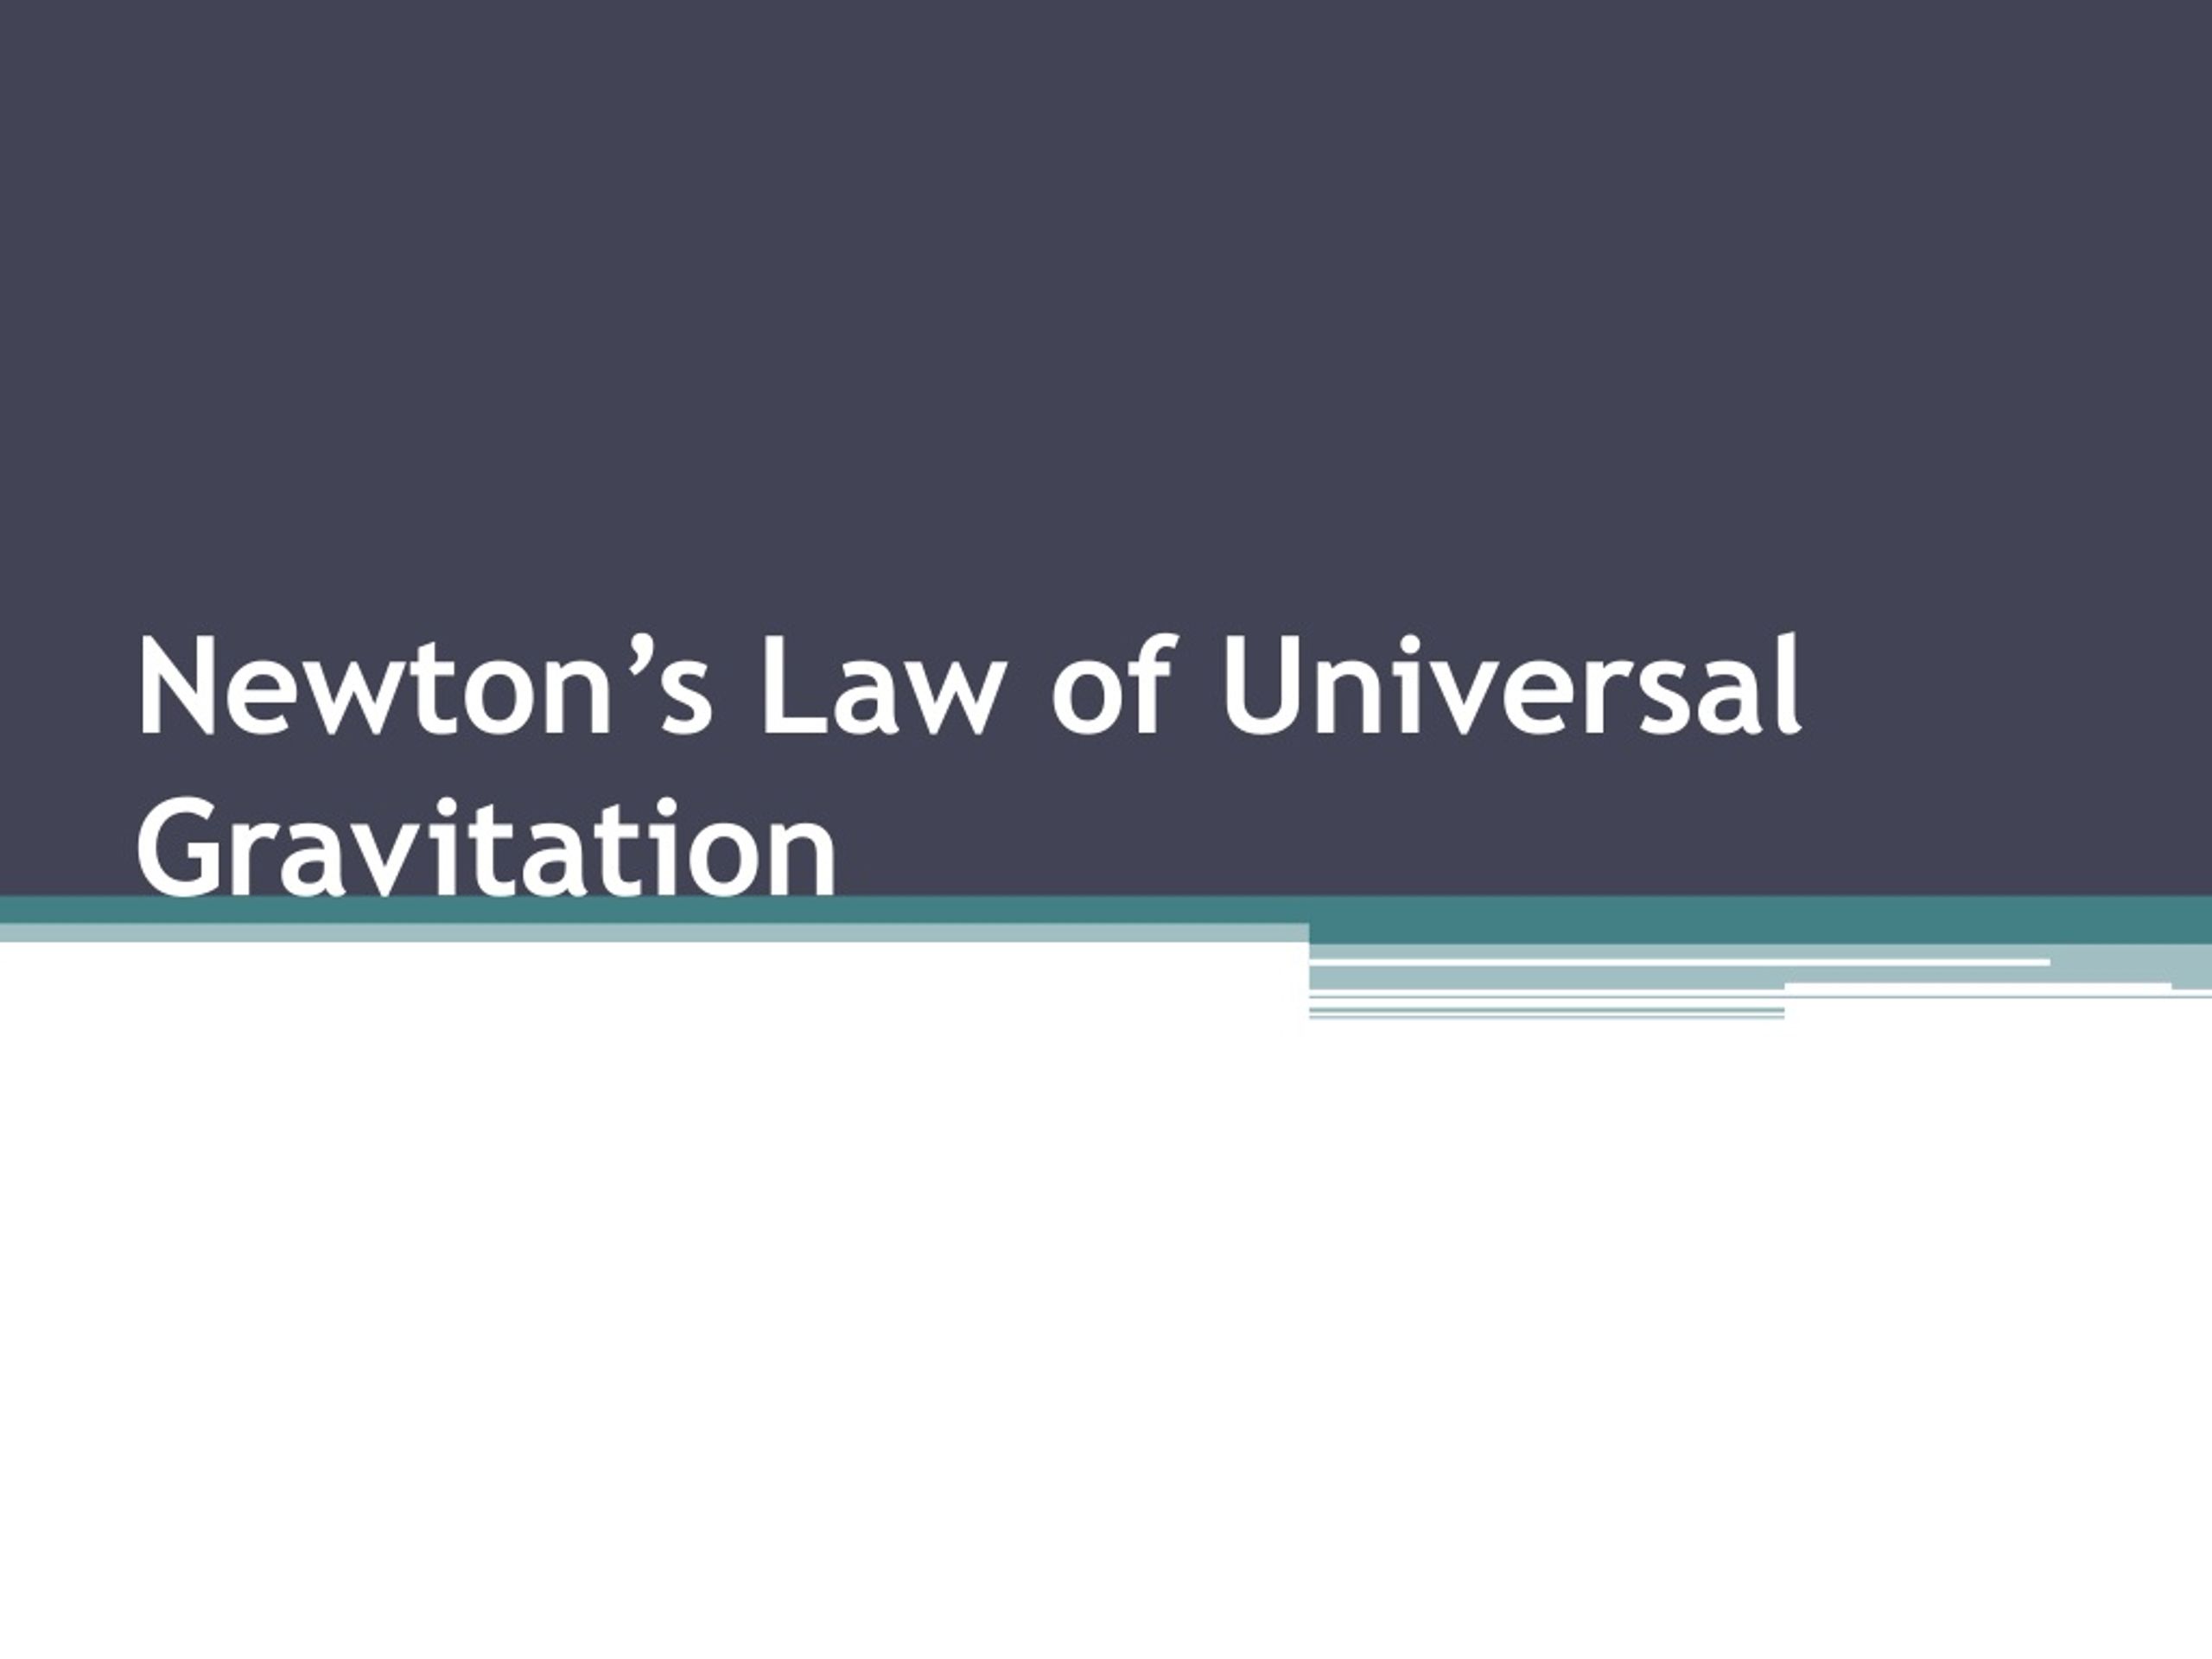 Ppt Newtons Law Of Universal Gravitation Powerpoint Presentation Free Download Id358165 1022